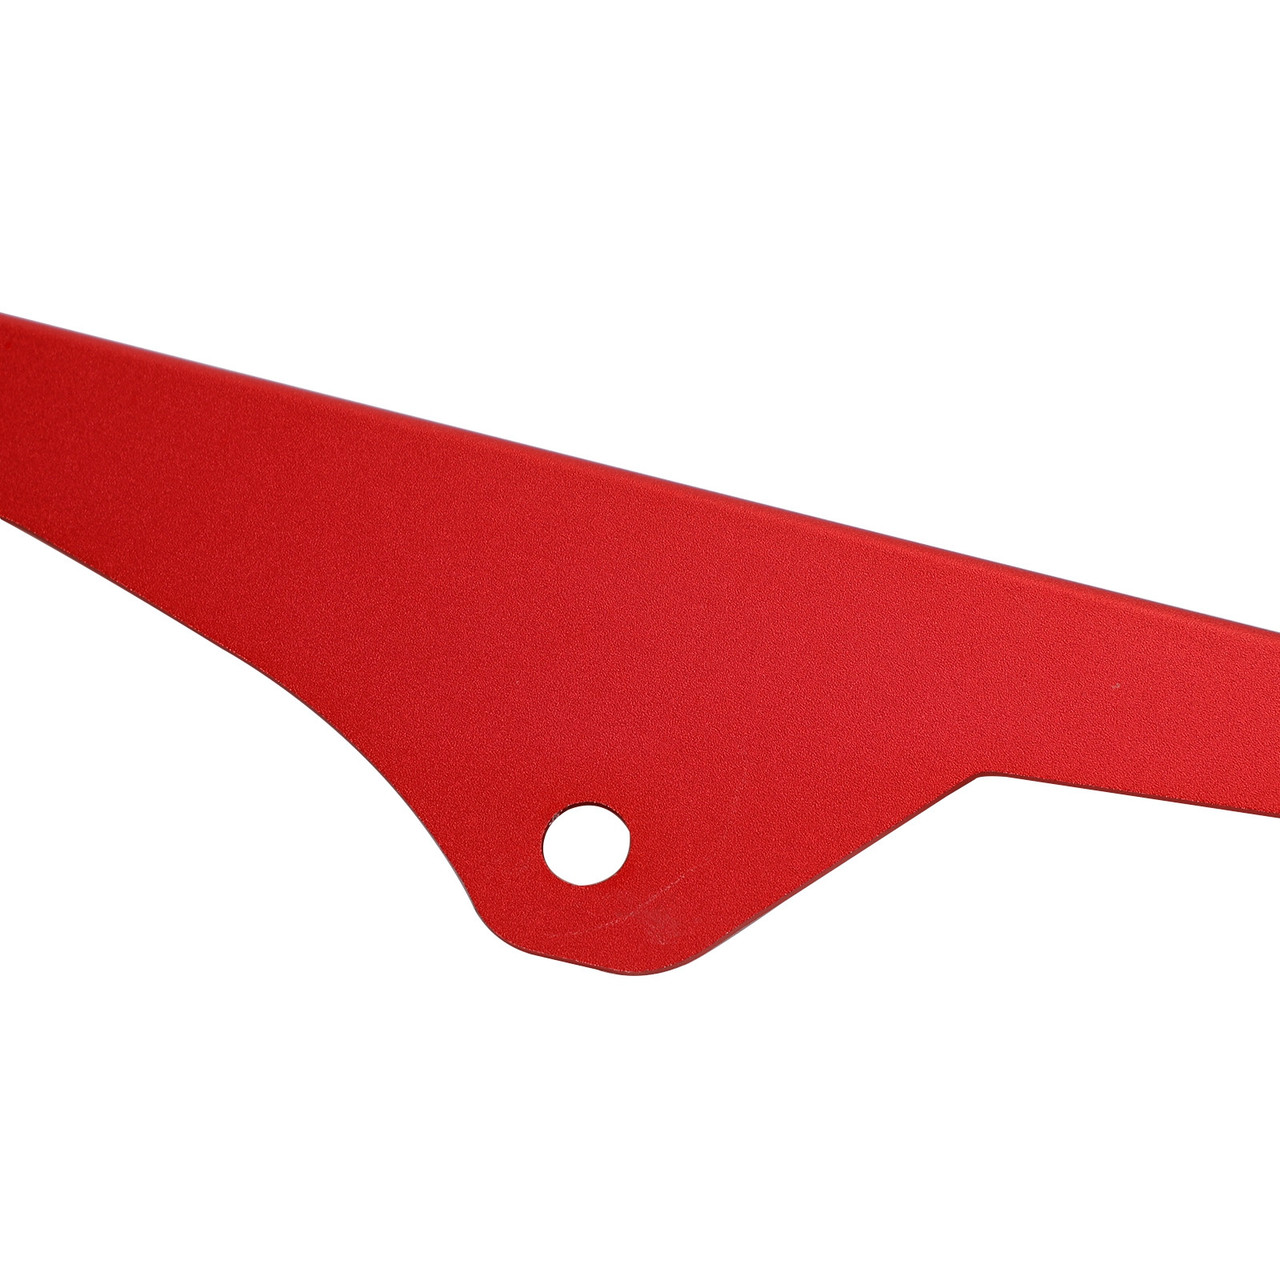 Sprocket Chain Guard Protector Cover For SUZUKI GSXR 600/750 2006-2010 Red